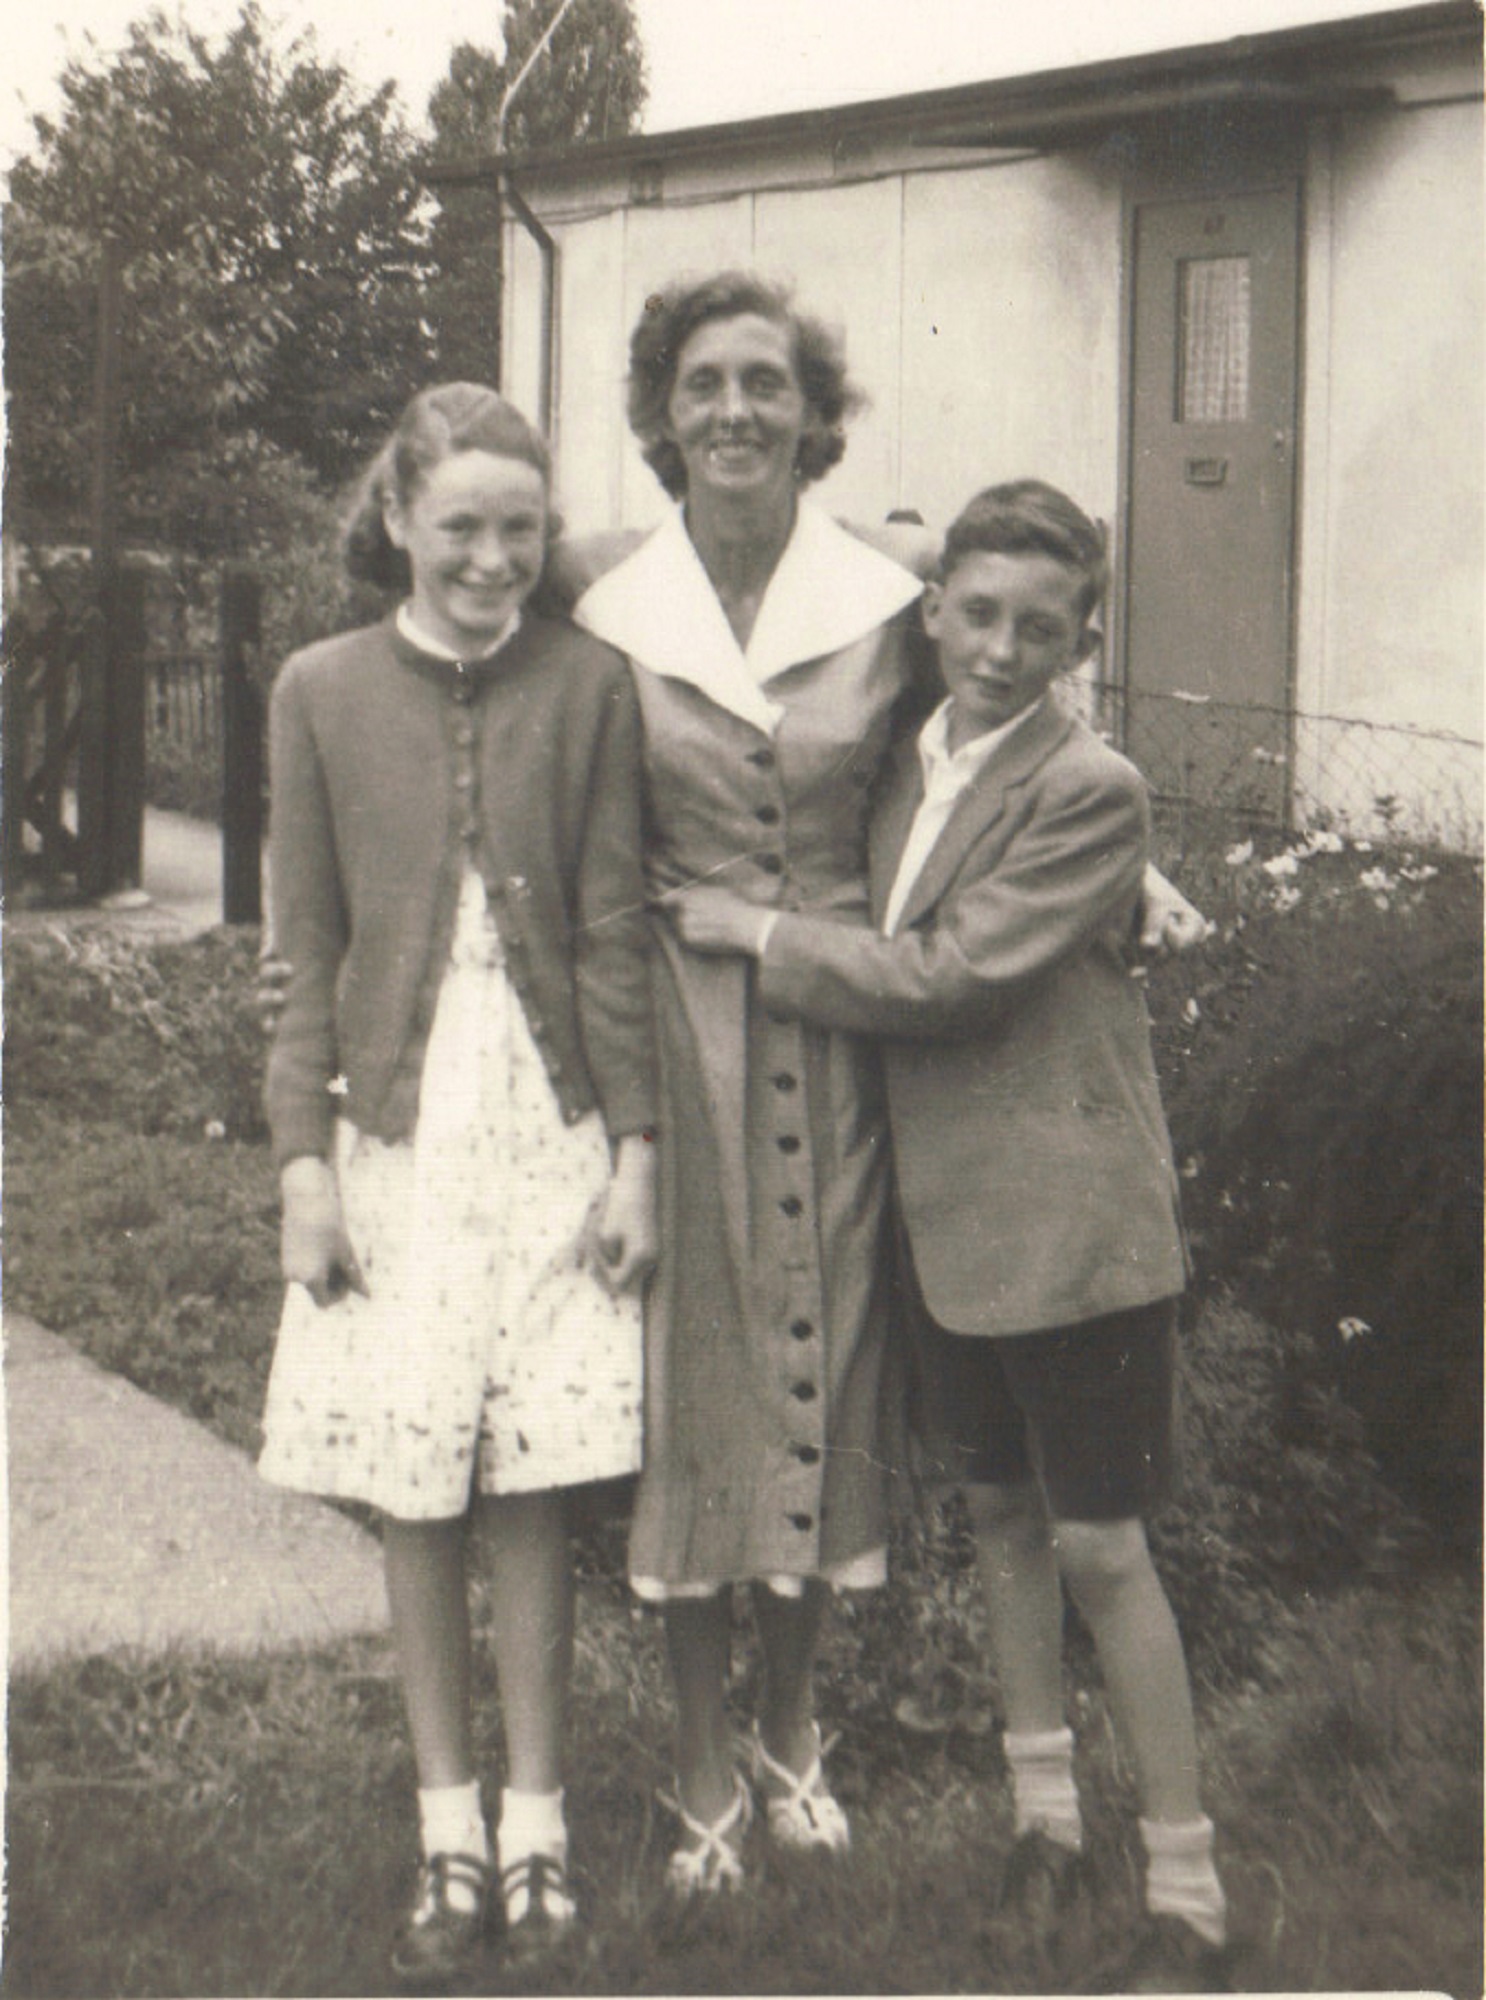 Terence, his mother and cousin Patricia from Blyth Northumberland, outside the prefab, Dartmouth Park Hill, London NW5